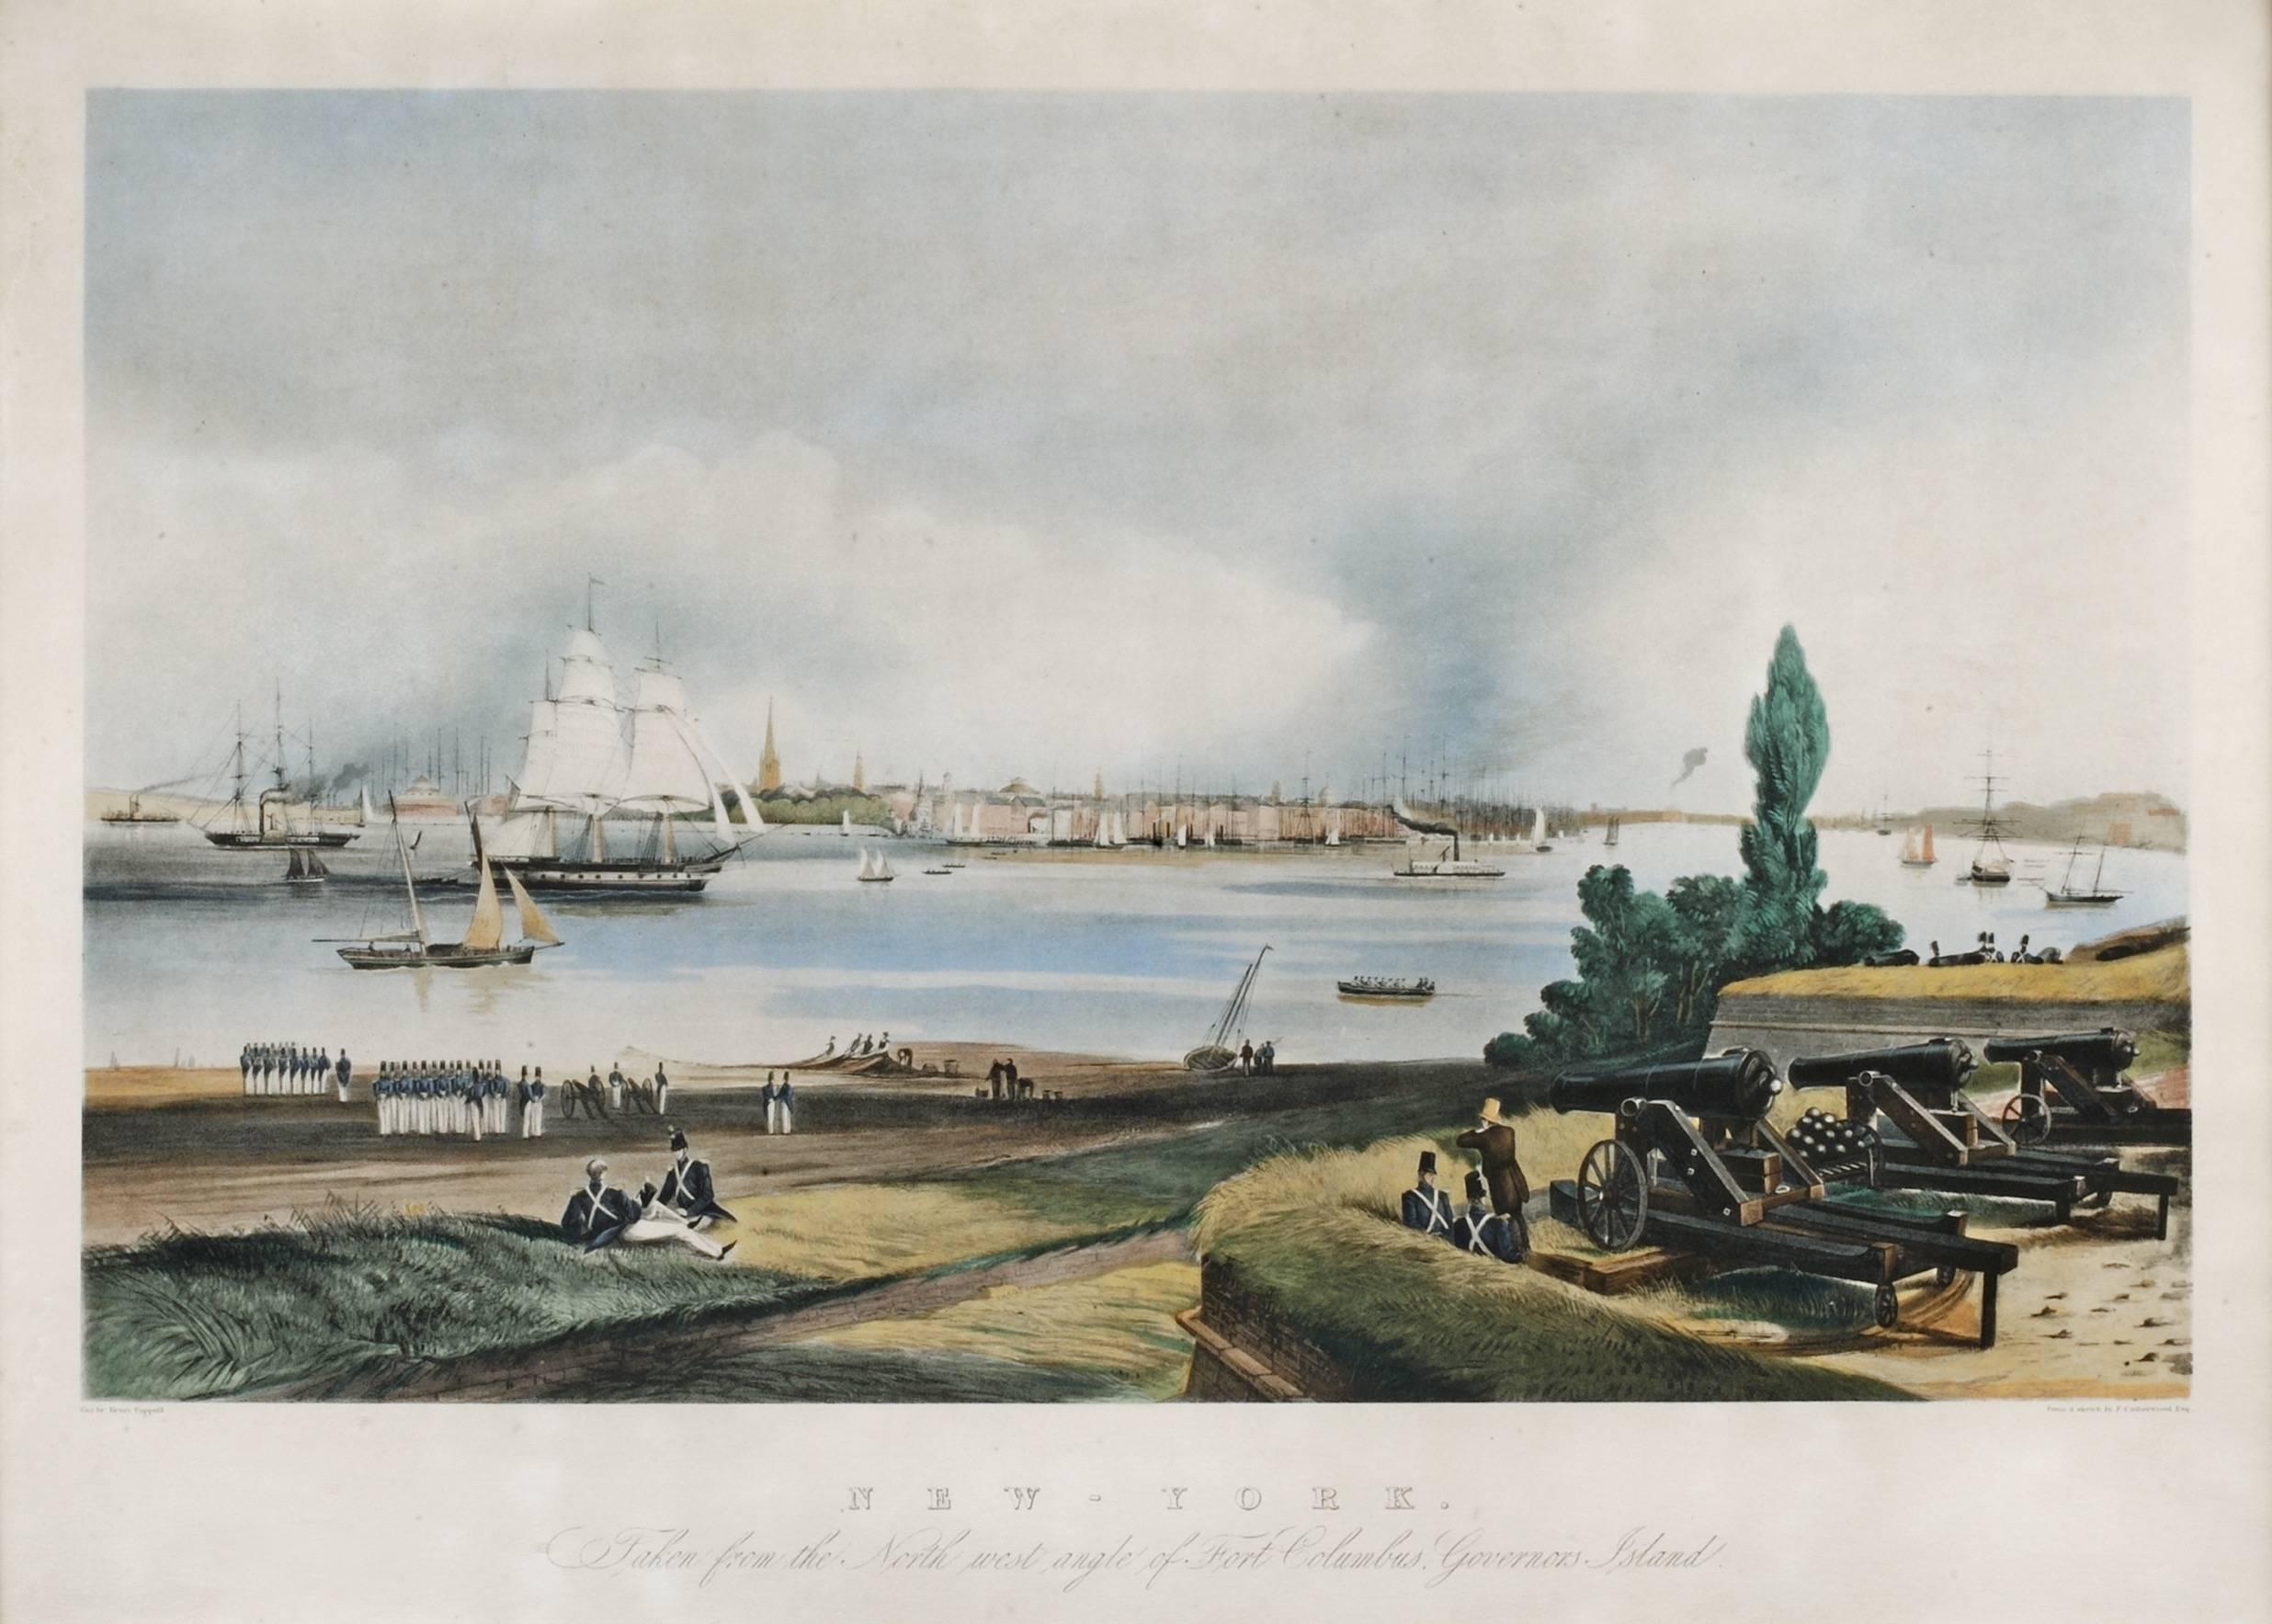 New York: Taken from Nort West Angle of Fort Columbus Governors Island - Print by Frederick Catherwood